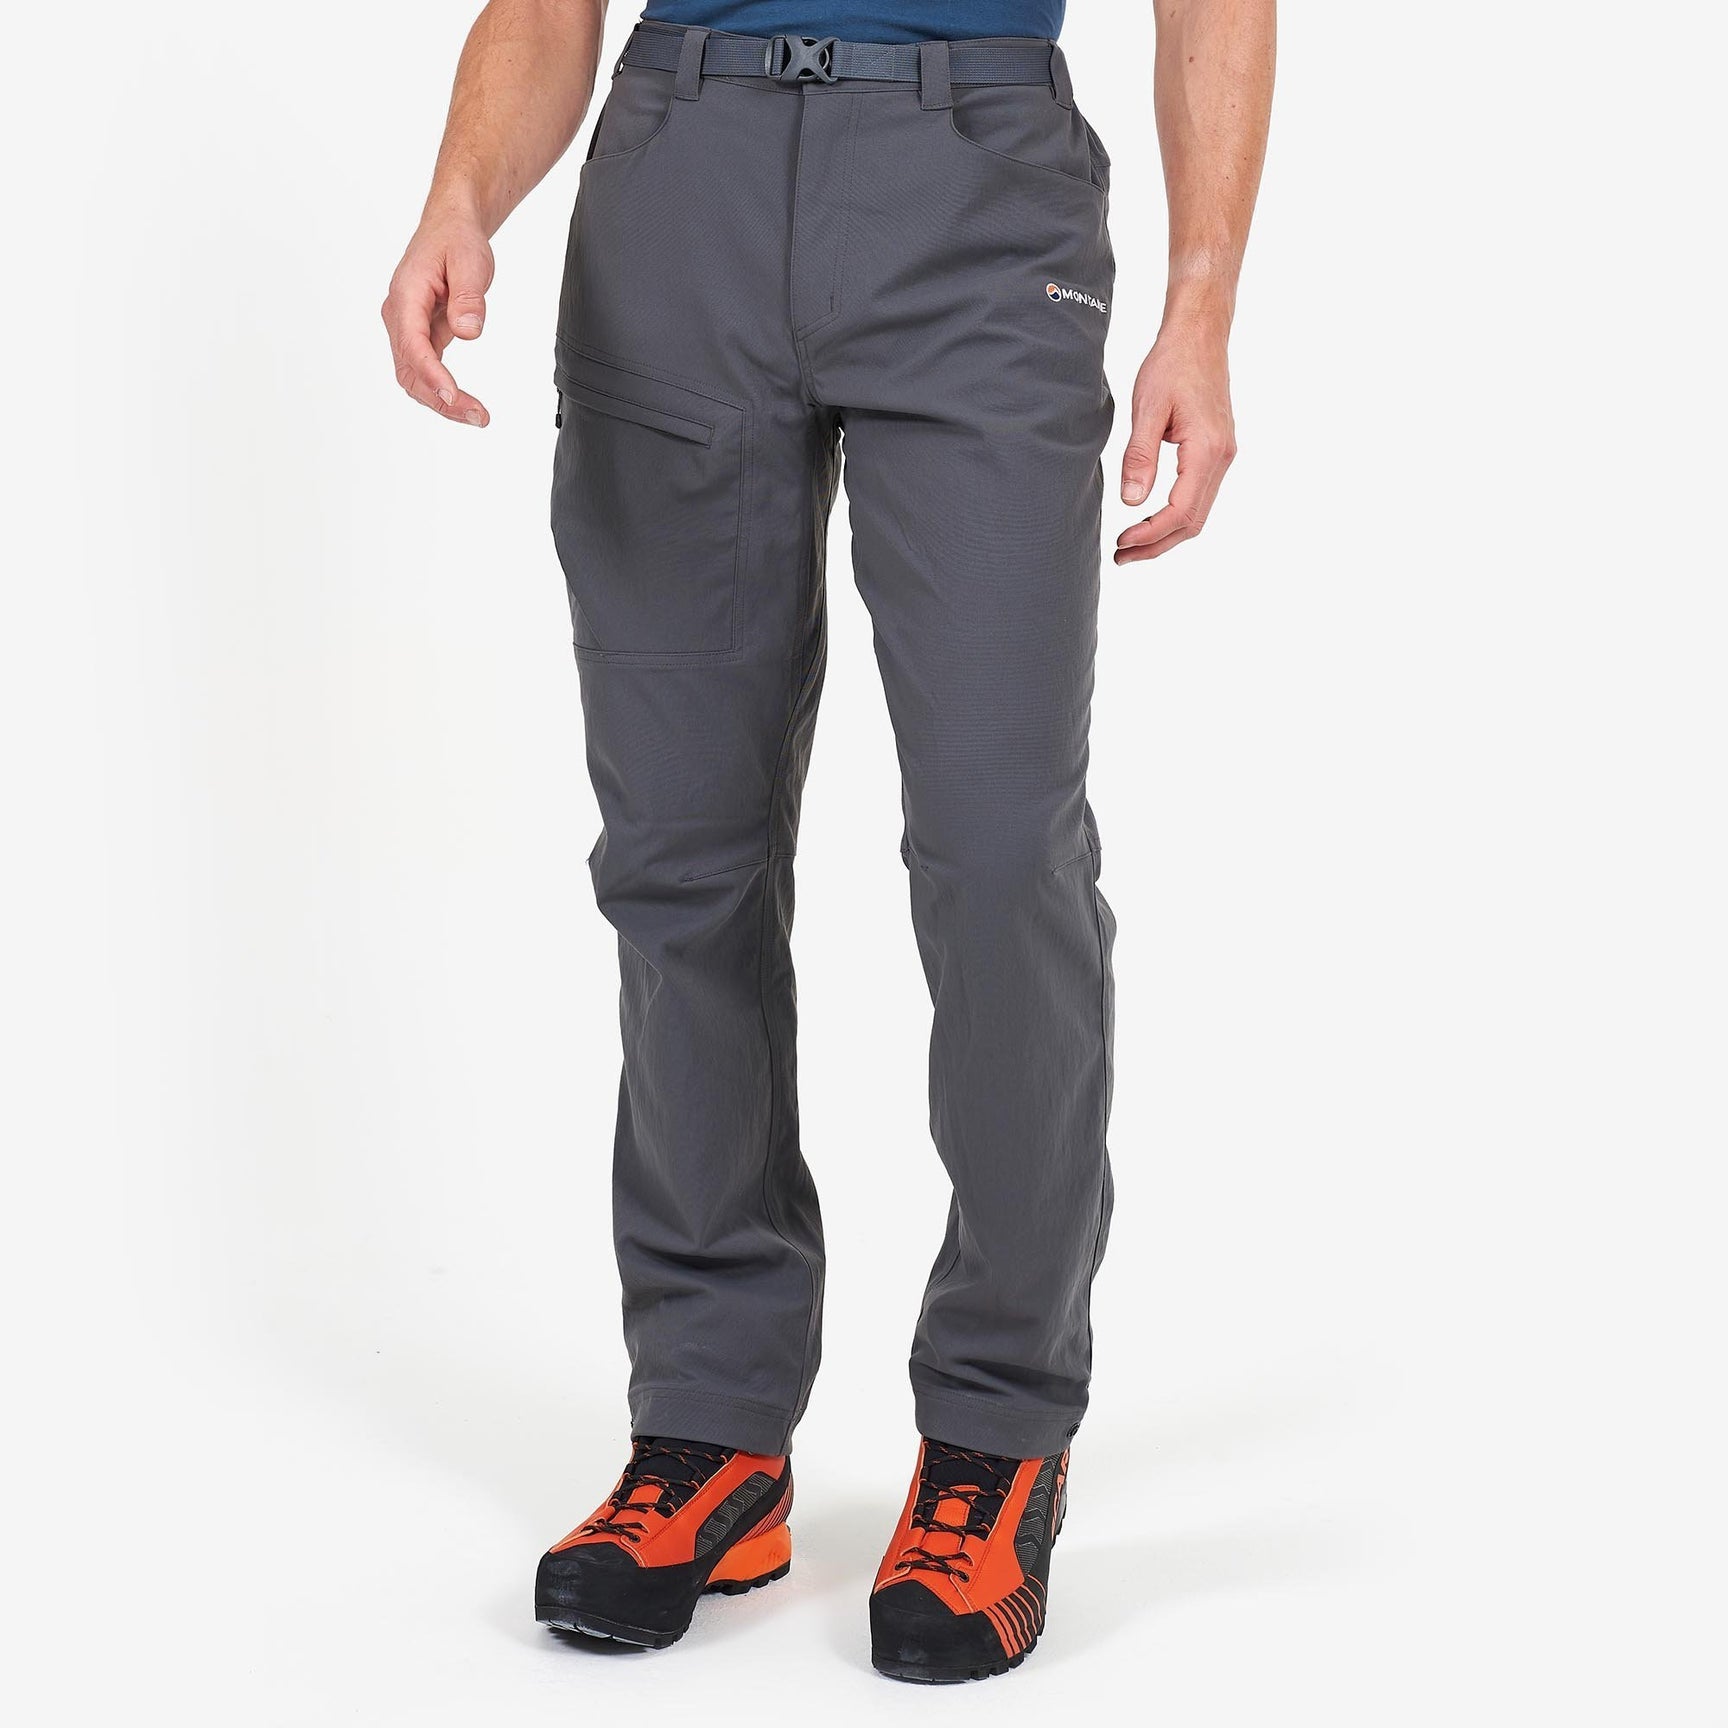 Mens walking trousers and hiking, trekking pants for the great outdoors ...